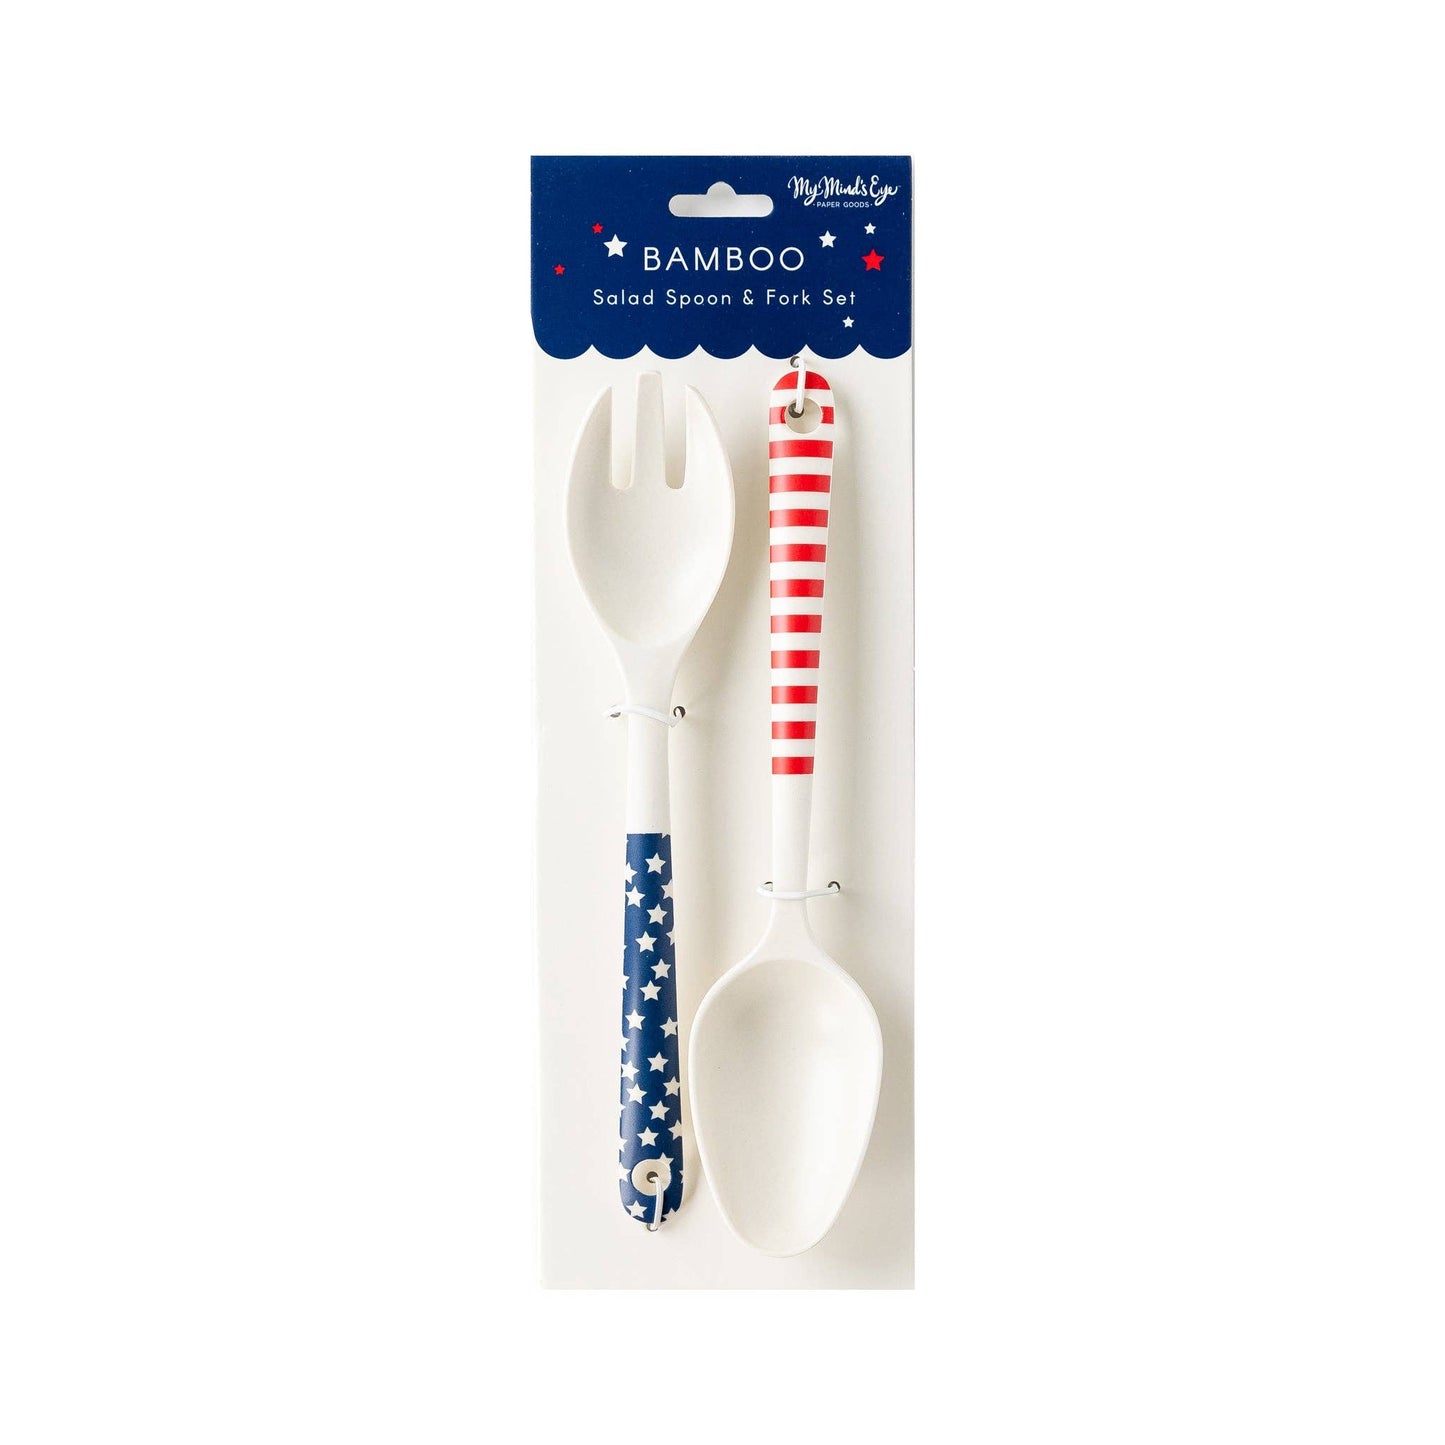 Stars and Stripes Salad Spoon and Fork Reusable Bamboo Serving-ware